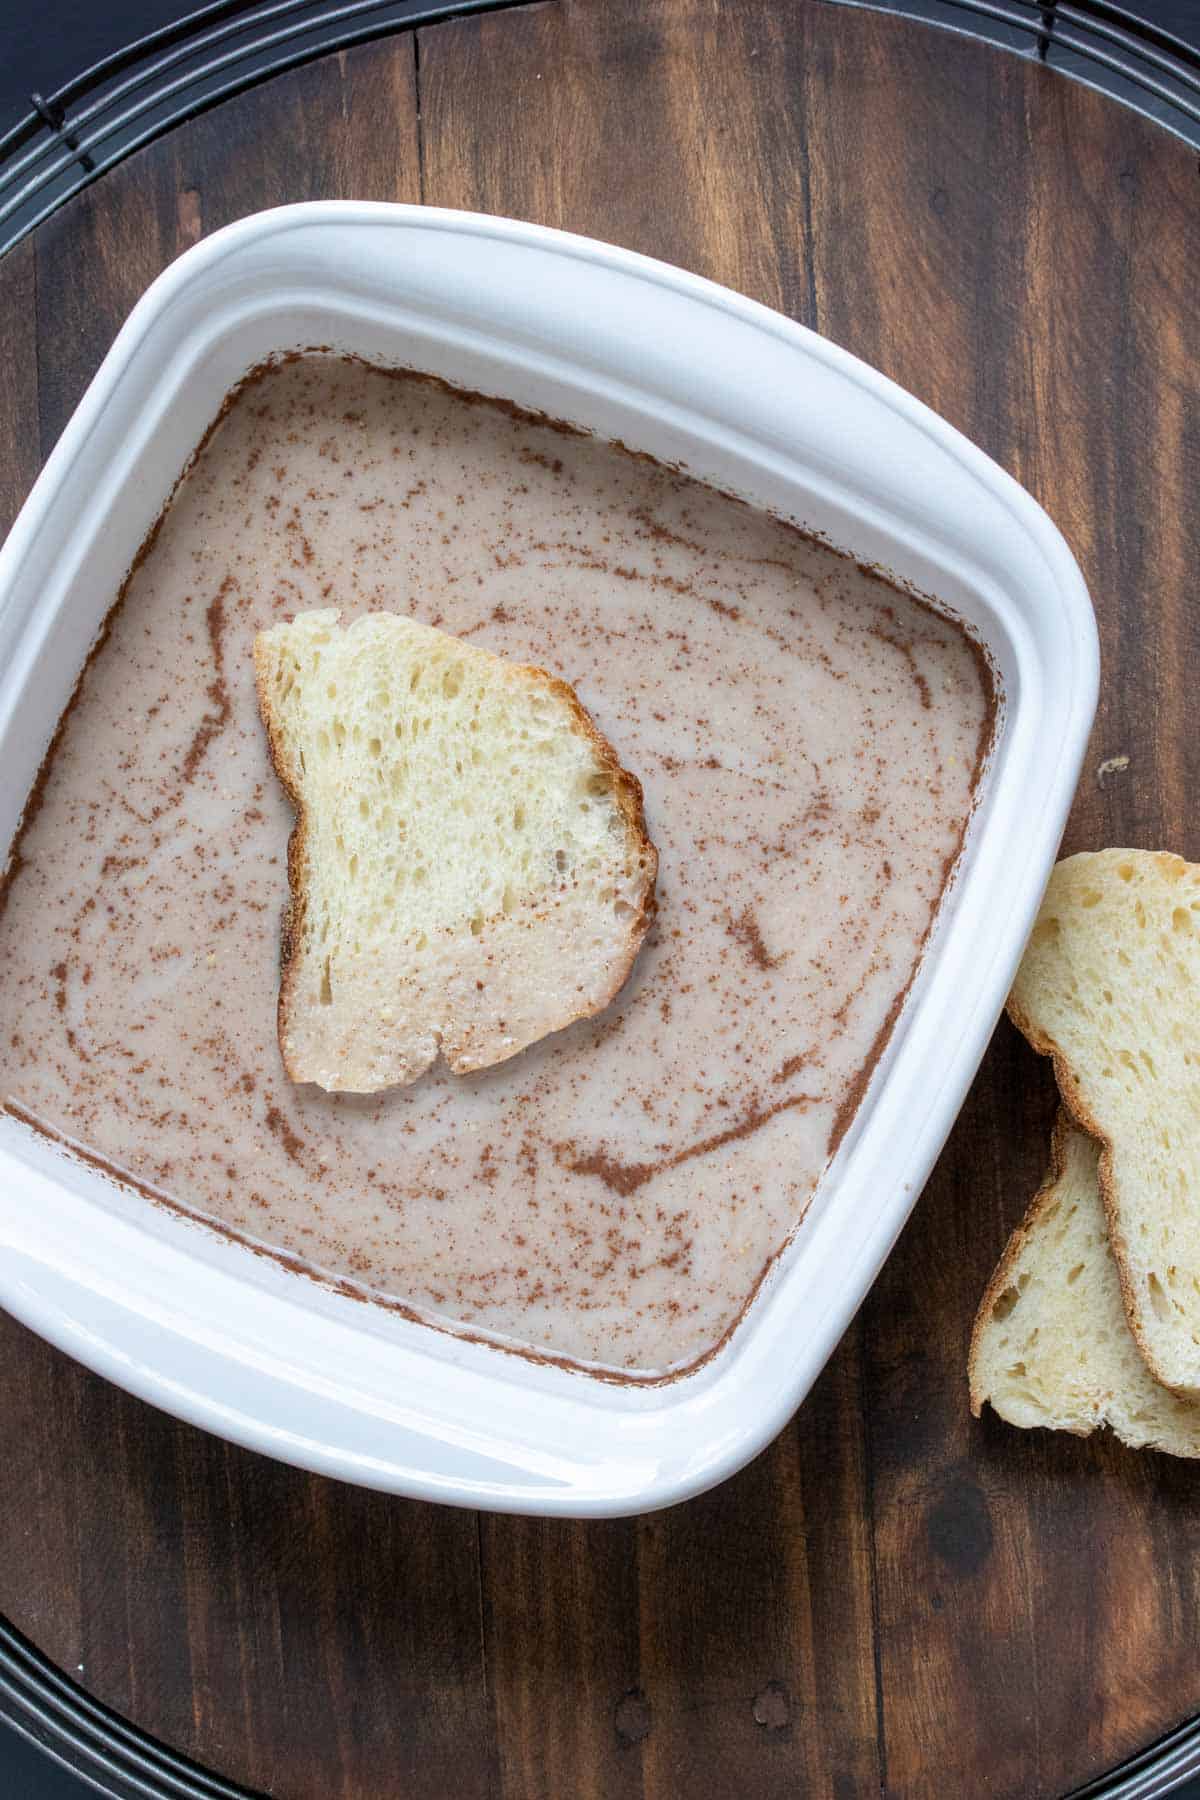 A piece of bread in a white pan filled with brownish milky liquid.